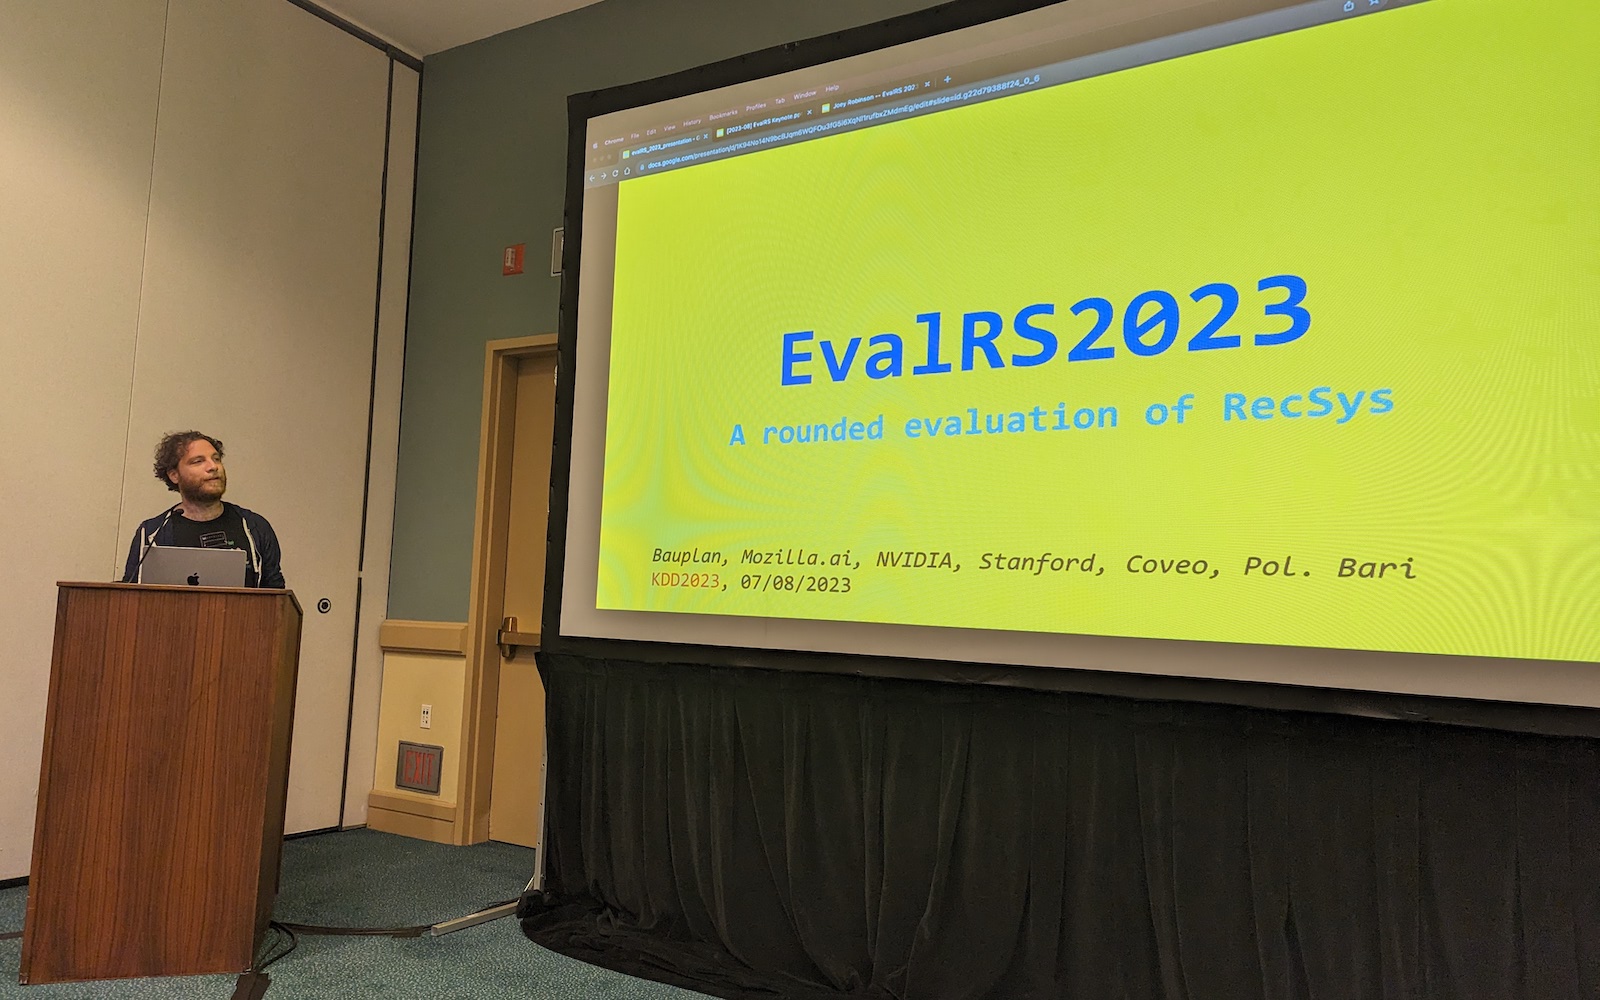 Jacopo Tagliabue presenting the introduction to the EvalRS workshop at KDD 2023.